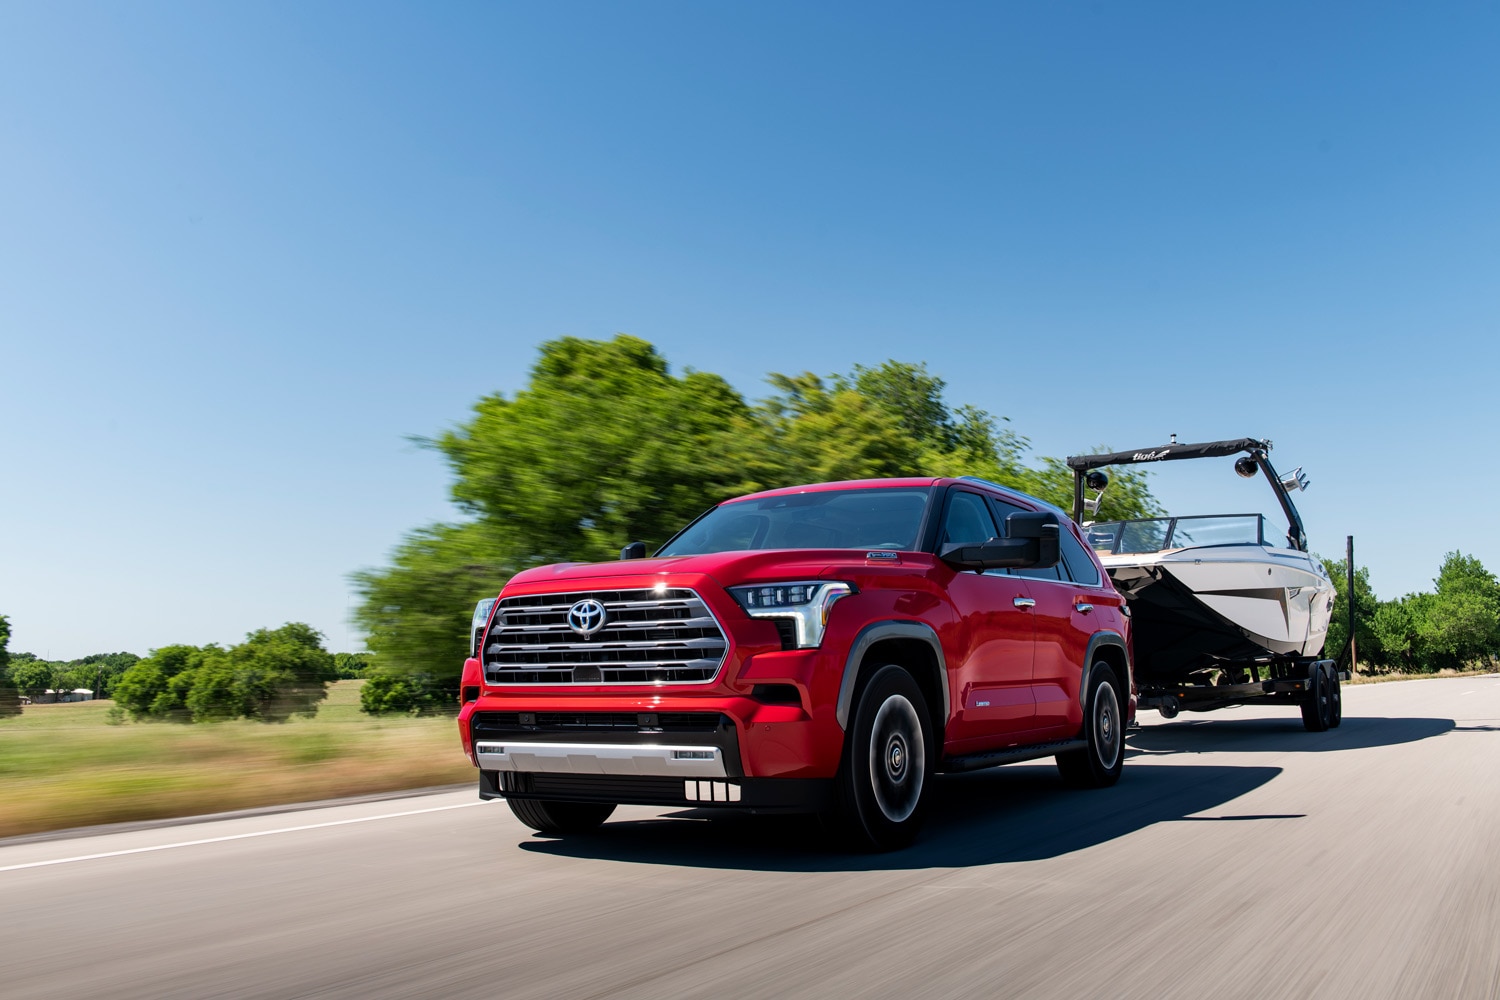 2023 Toyota Sequoia Capstone in Supersonic red towing ski boat